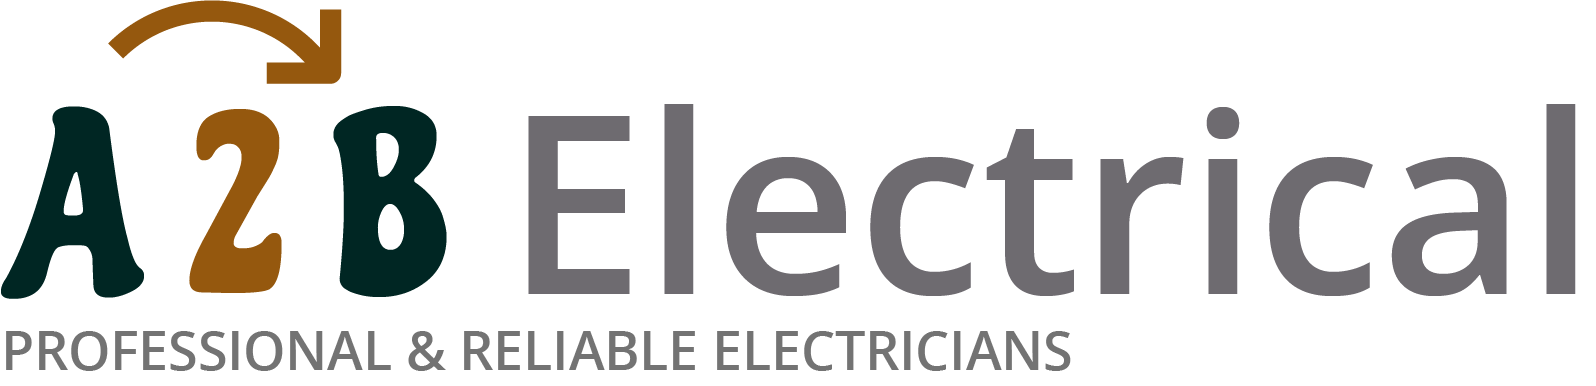 If you have electrical wiring problems in Leominster, we can provide an electrician to have a look for you. 